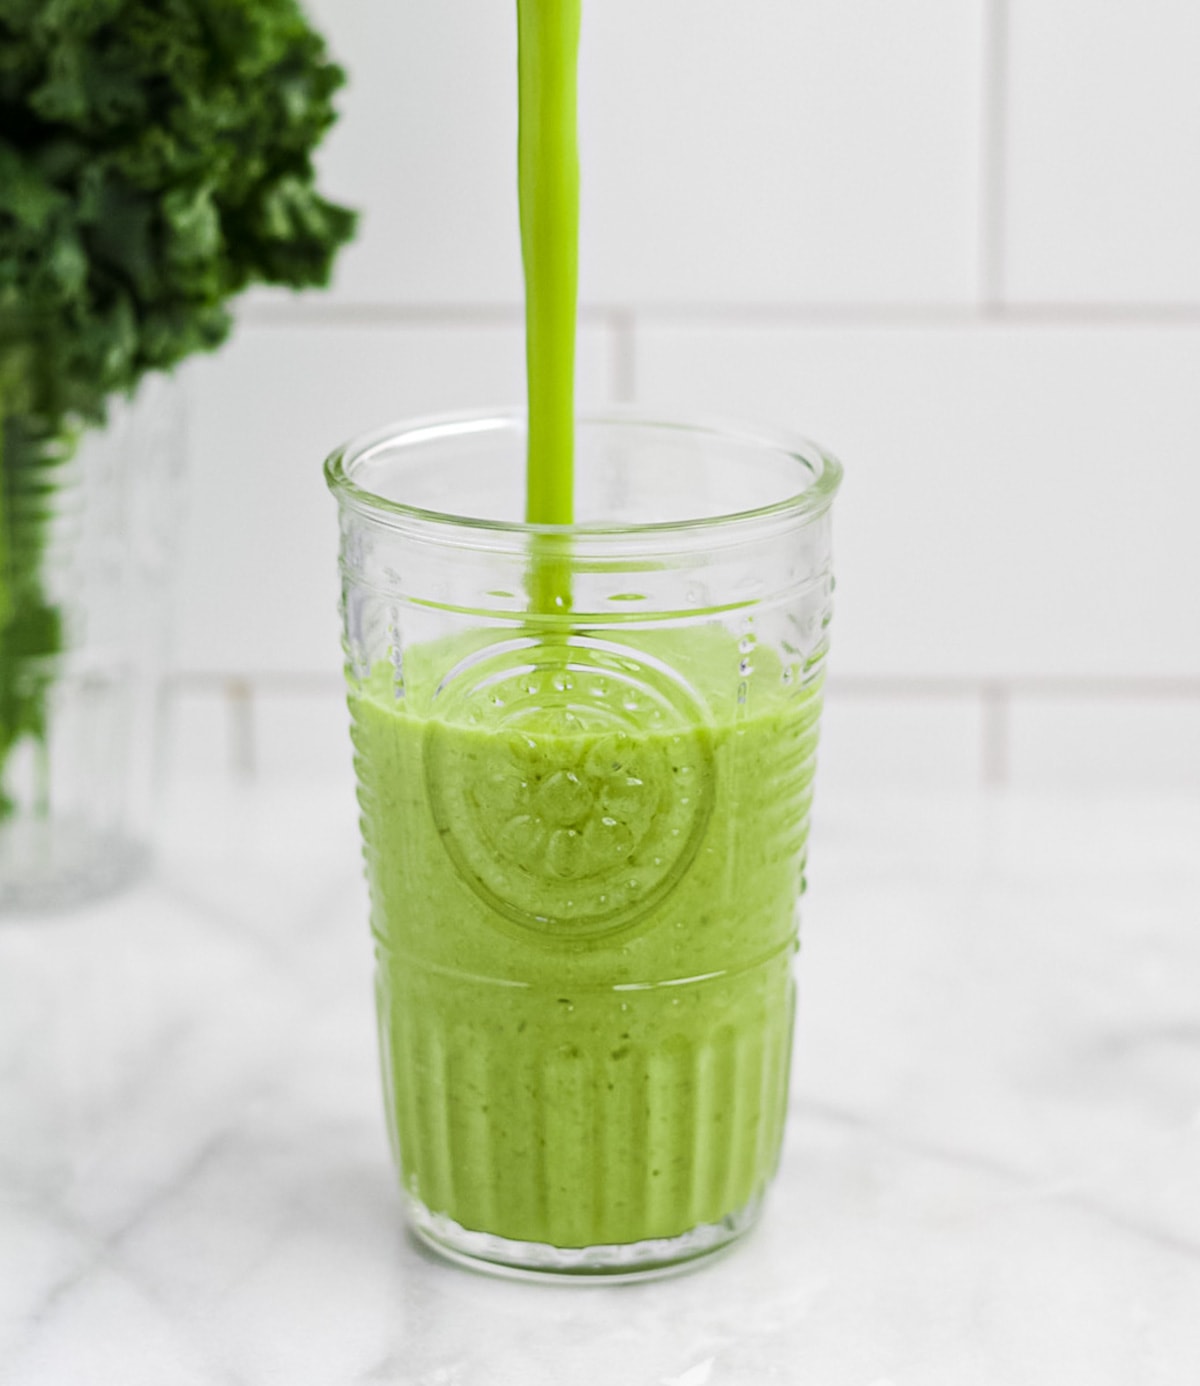 A green smoothie being poured into a clear glass. A bunch of kale is in the background.